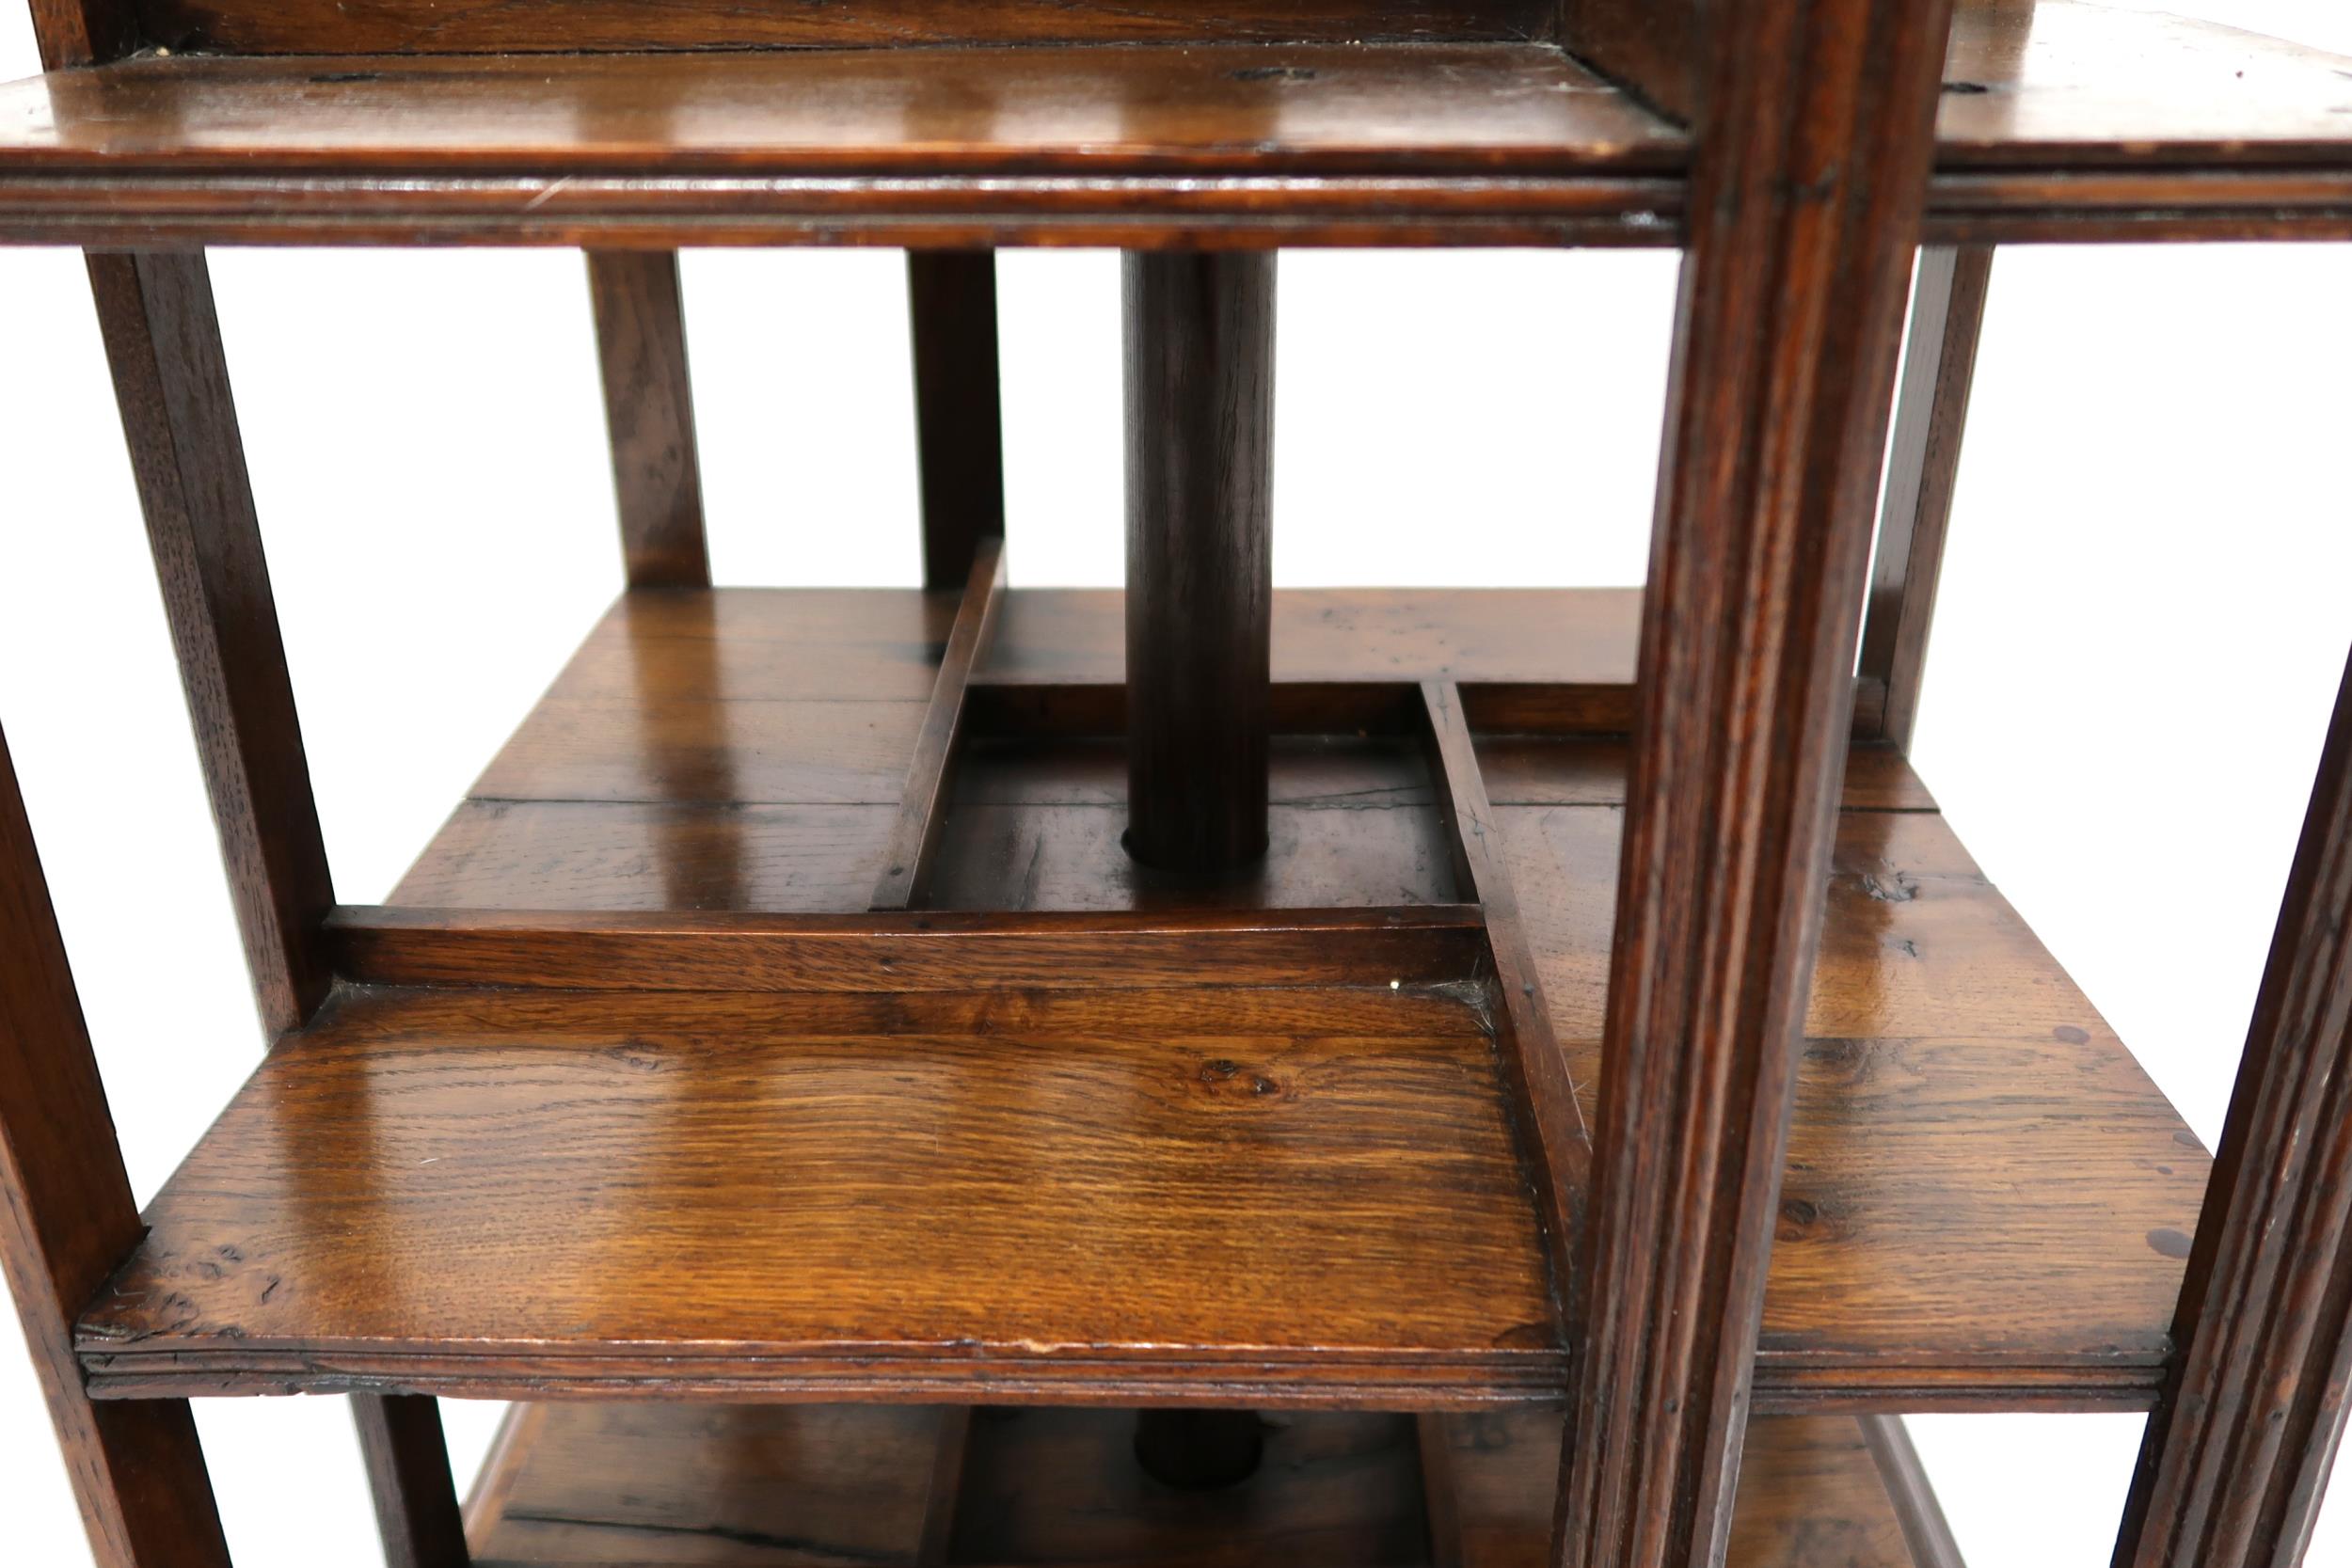 AN EARLY 20TH CENTURY OAK AND PINE GOODALL, LAMB & HEIGHWAY LTD MANCHESTER REVOLVING BOOKCASE - Image 5 of 9